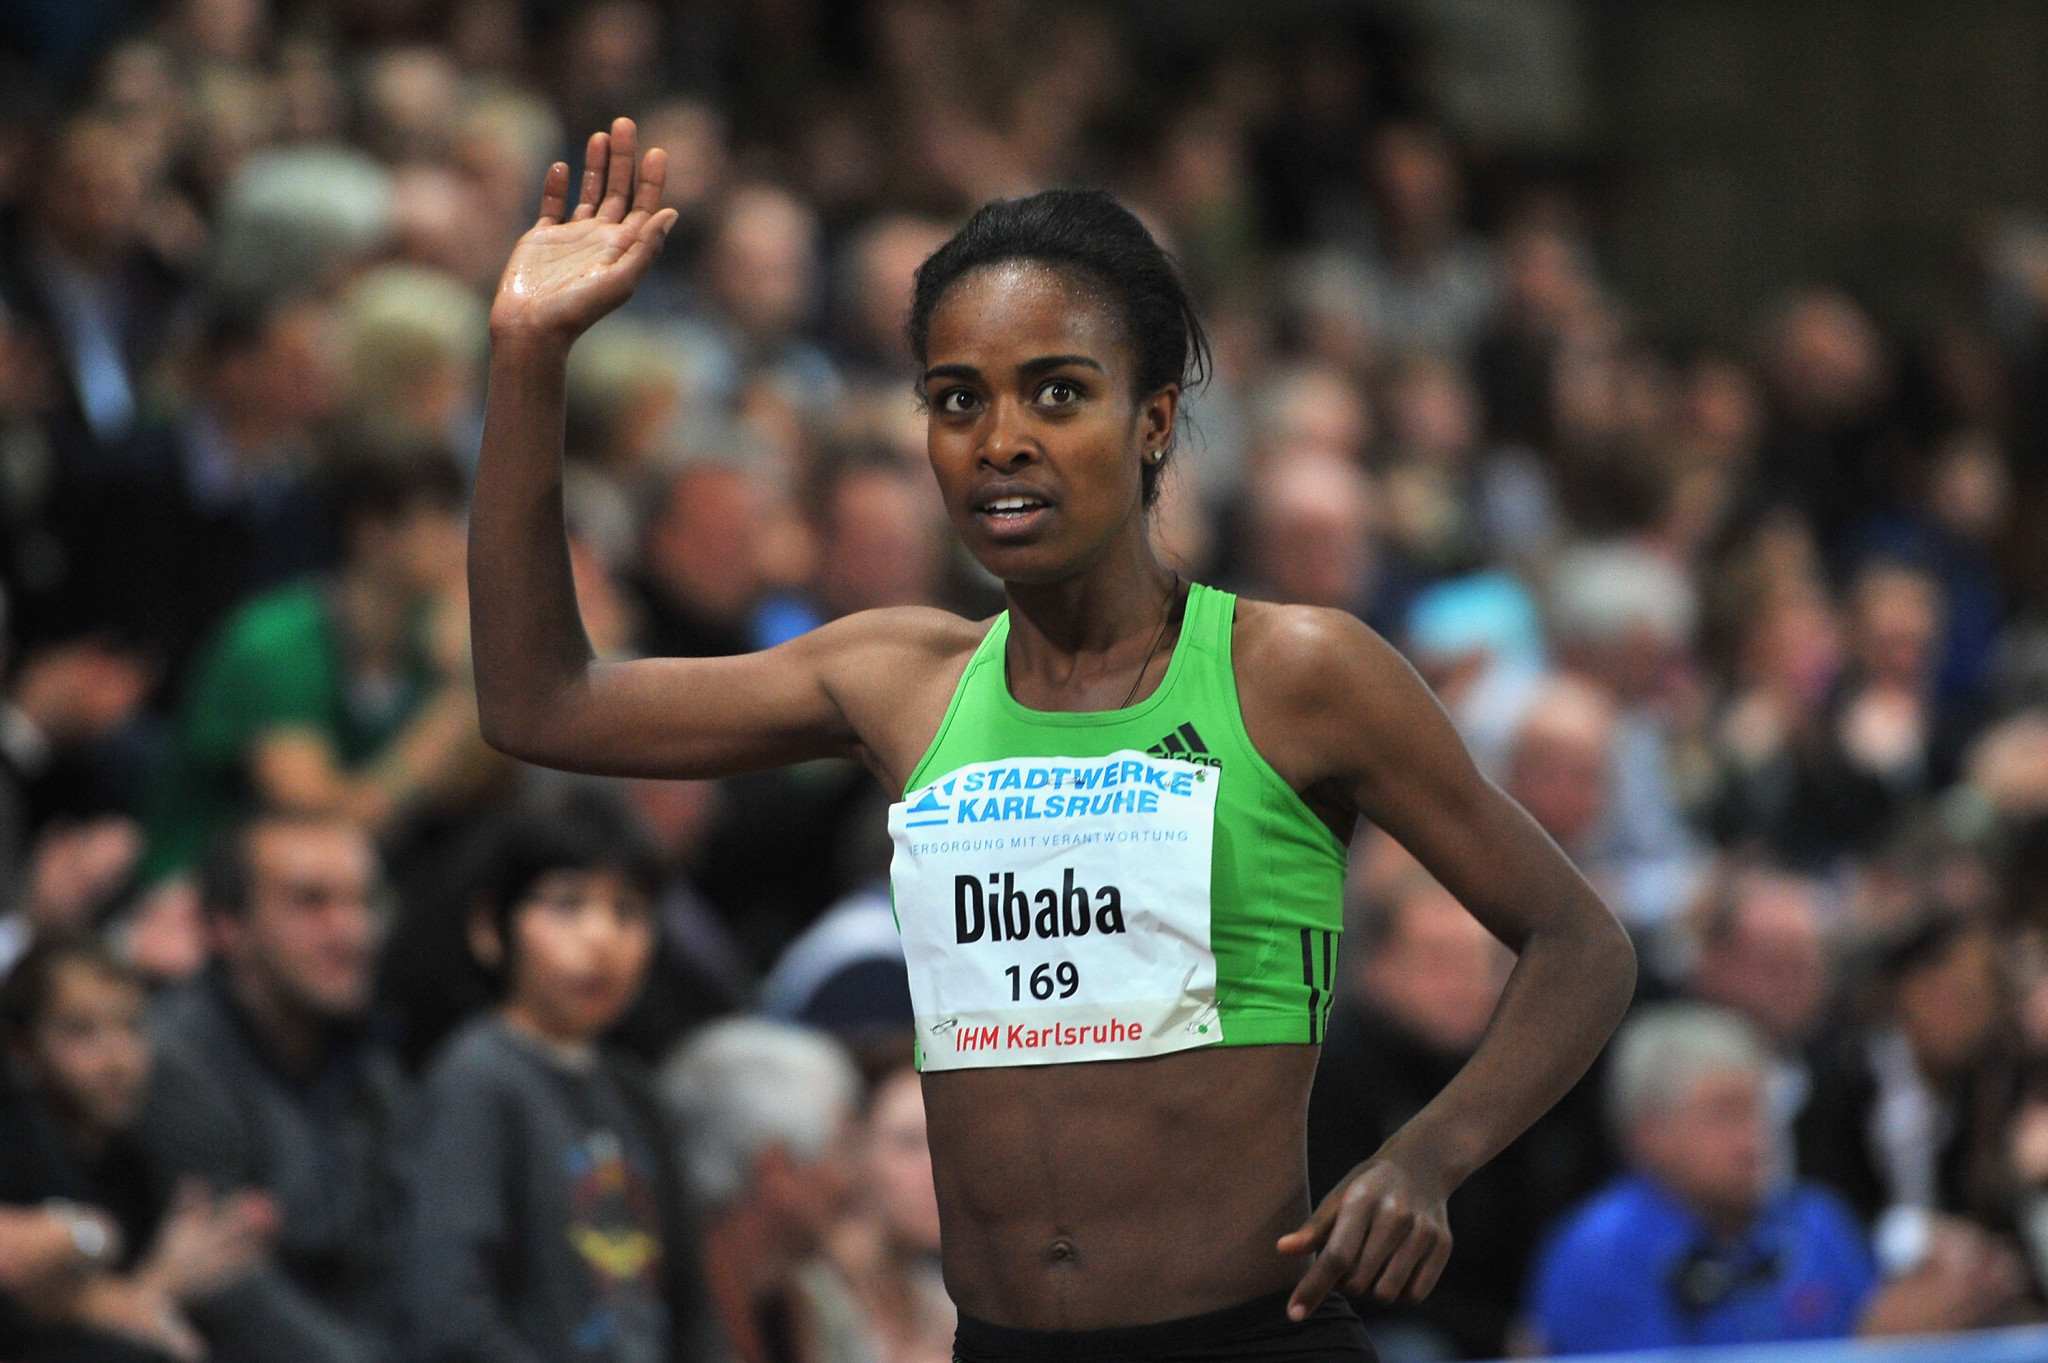 Dibaba to return to scene of record at IAAF Indoor Tour opener in Karlsruhe